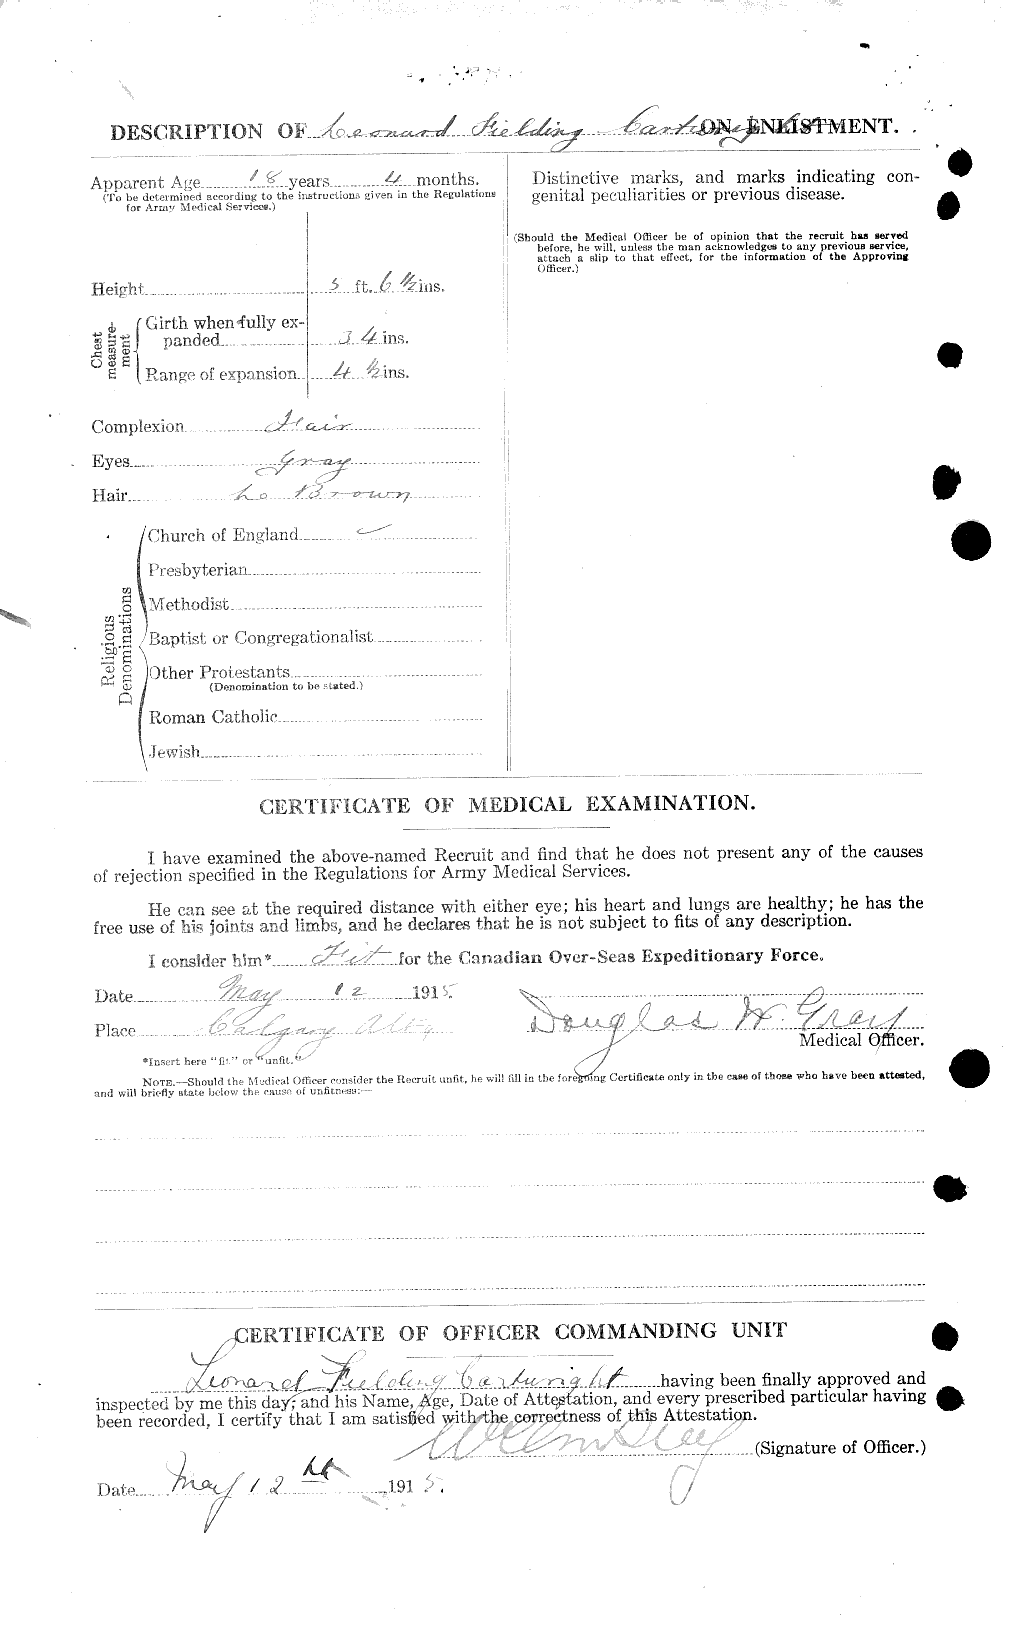 Personnel Records of the First World War - CEF 011608b